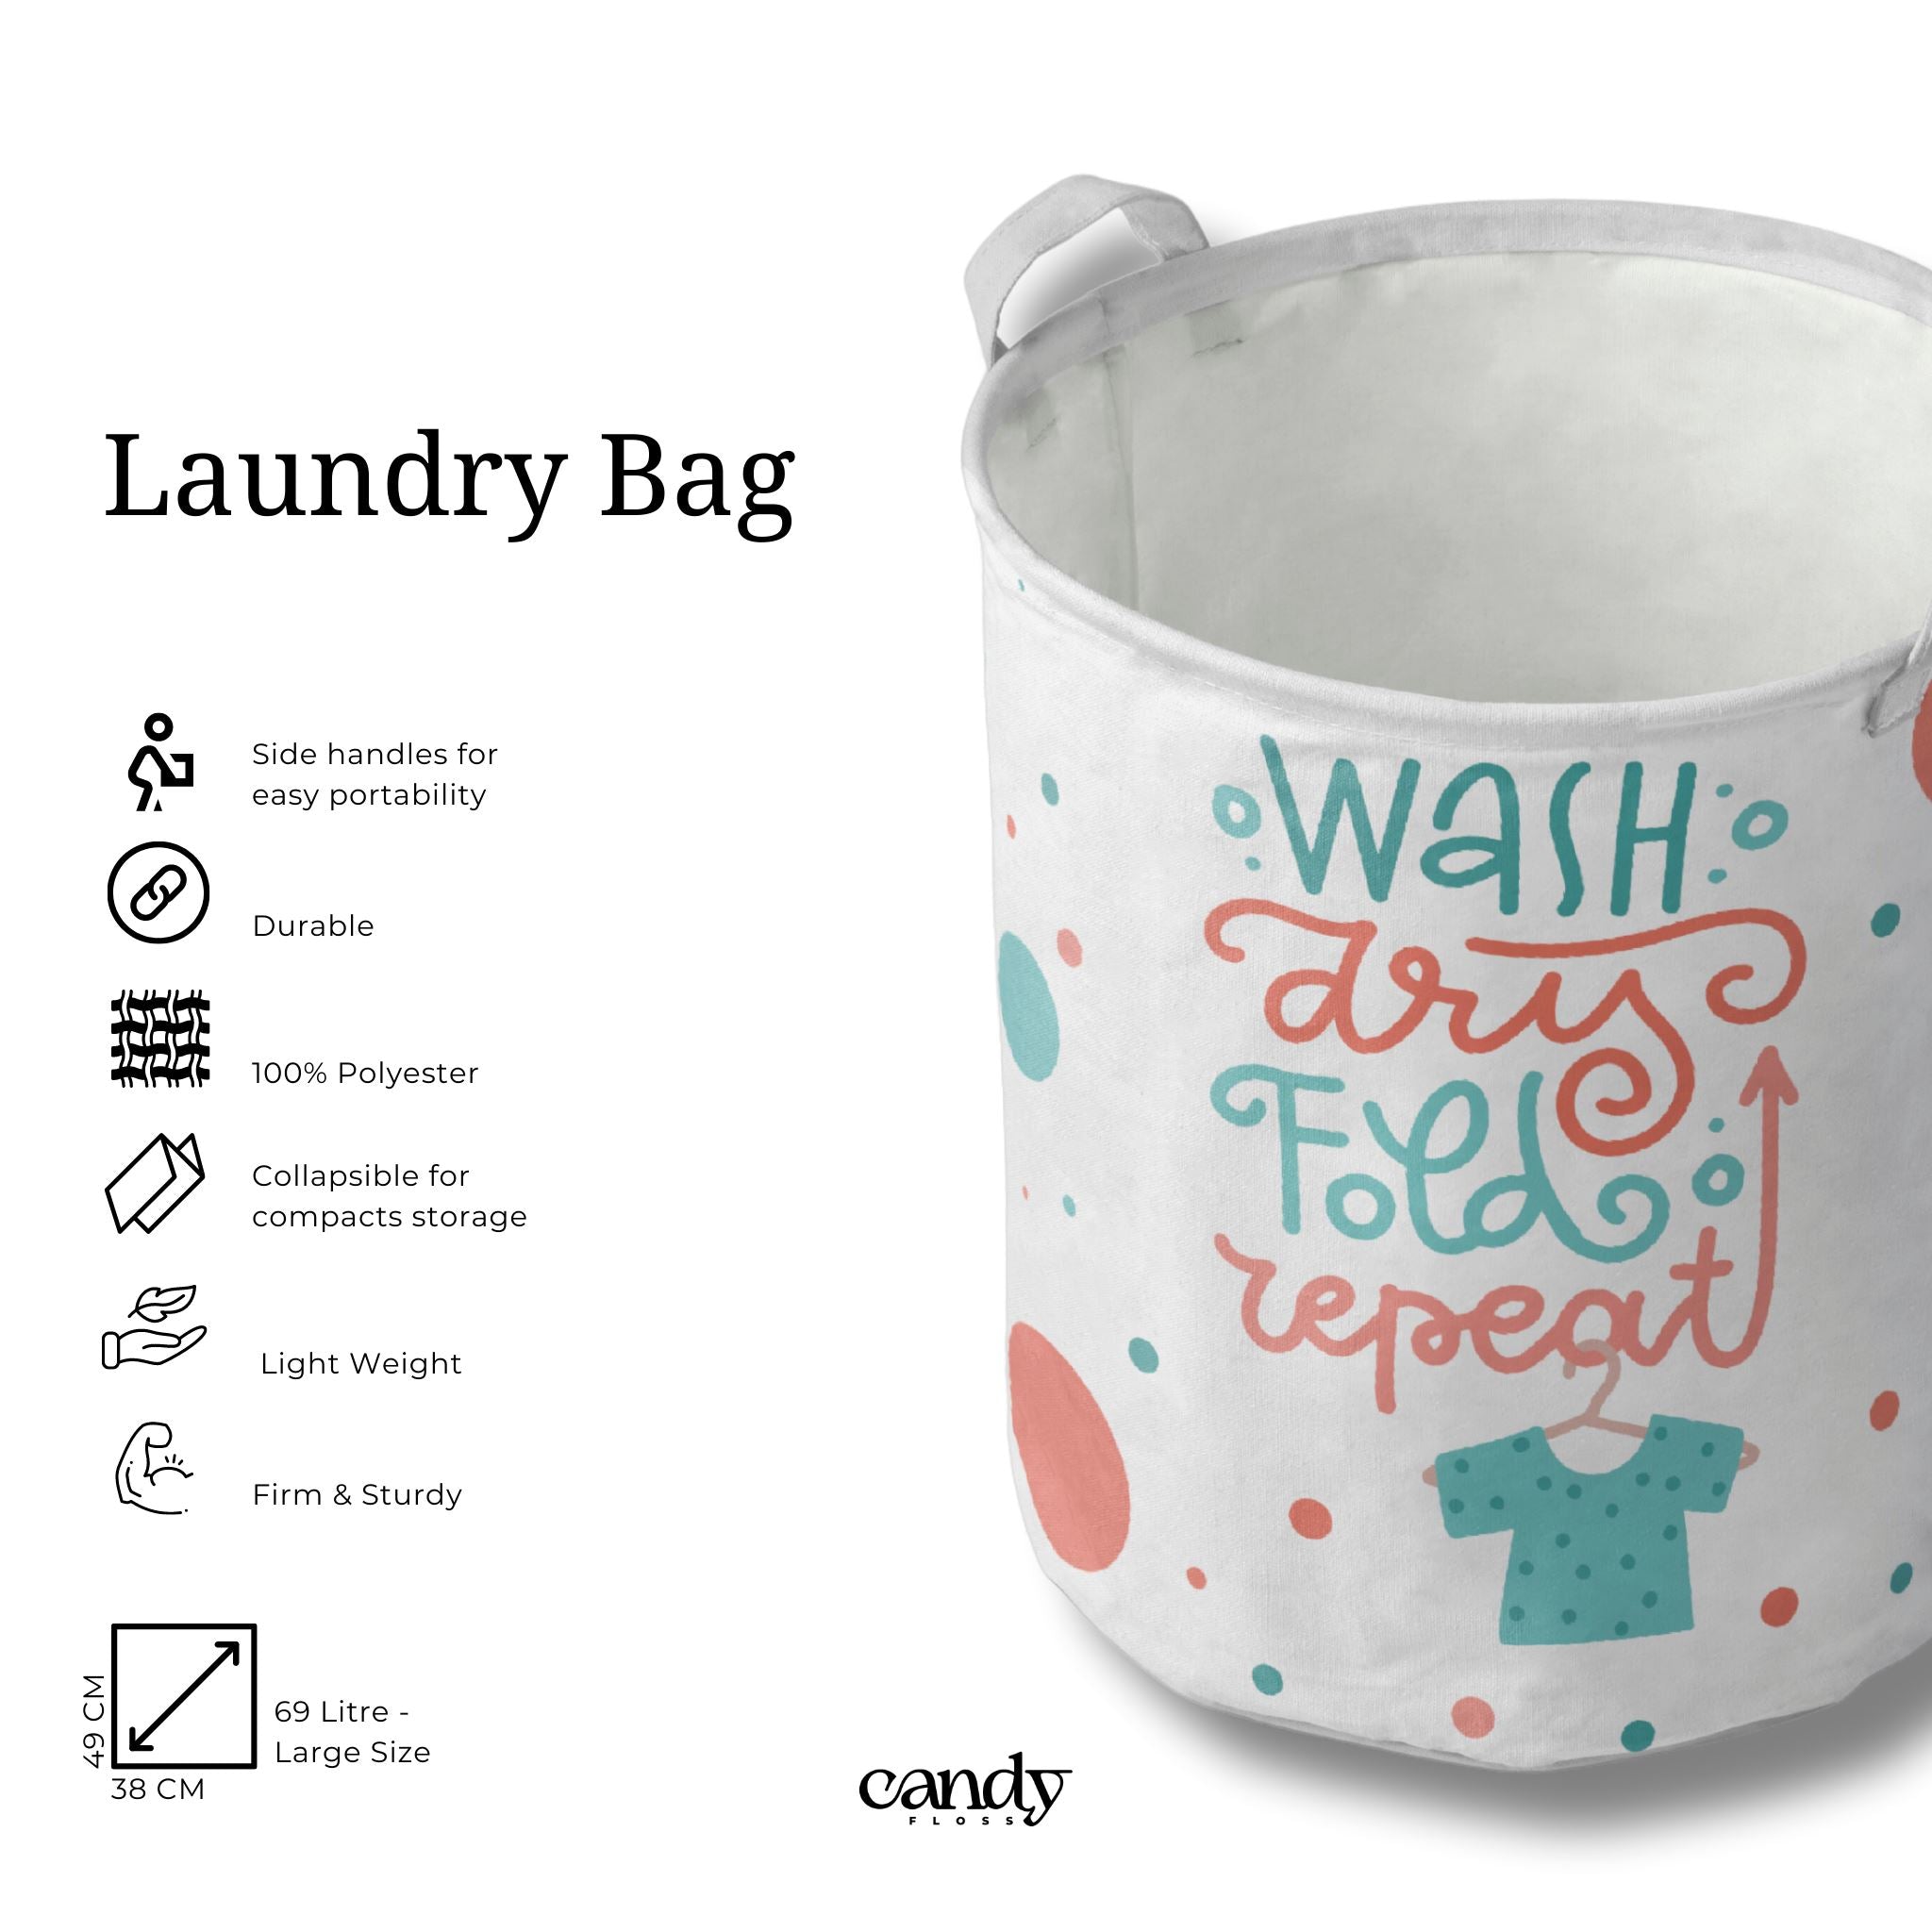 13 Best Laundry Baskets and Hampers | The Strategist